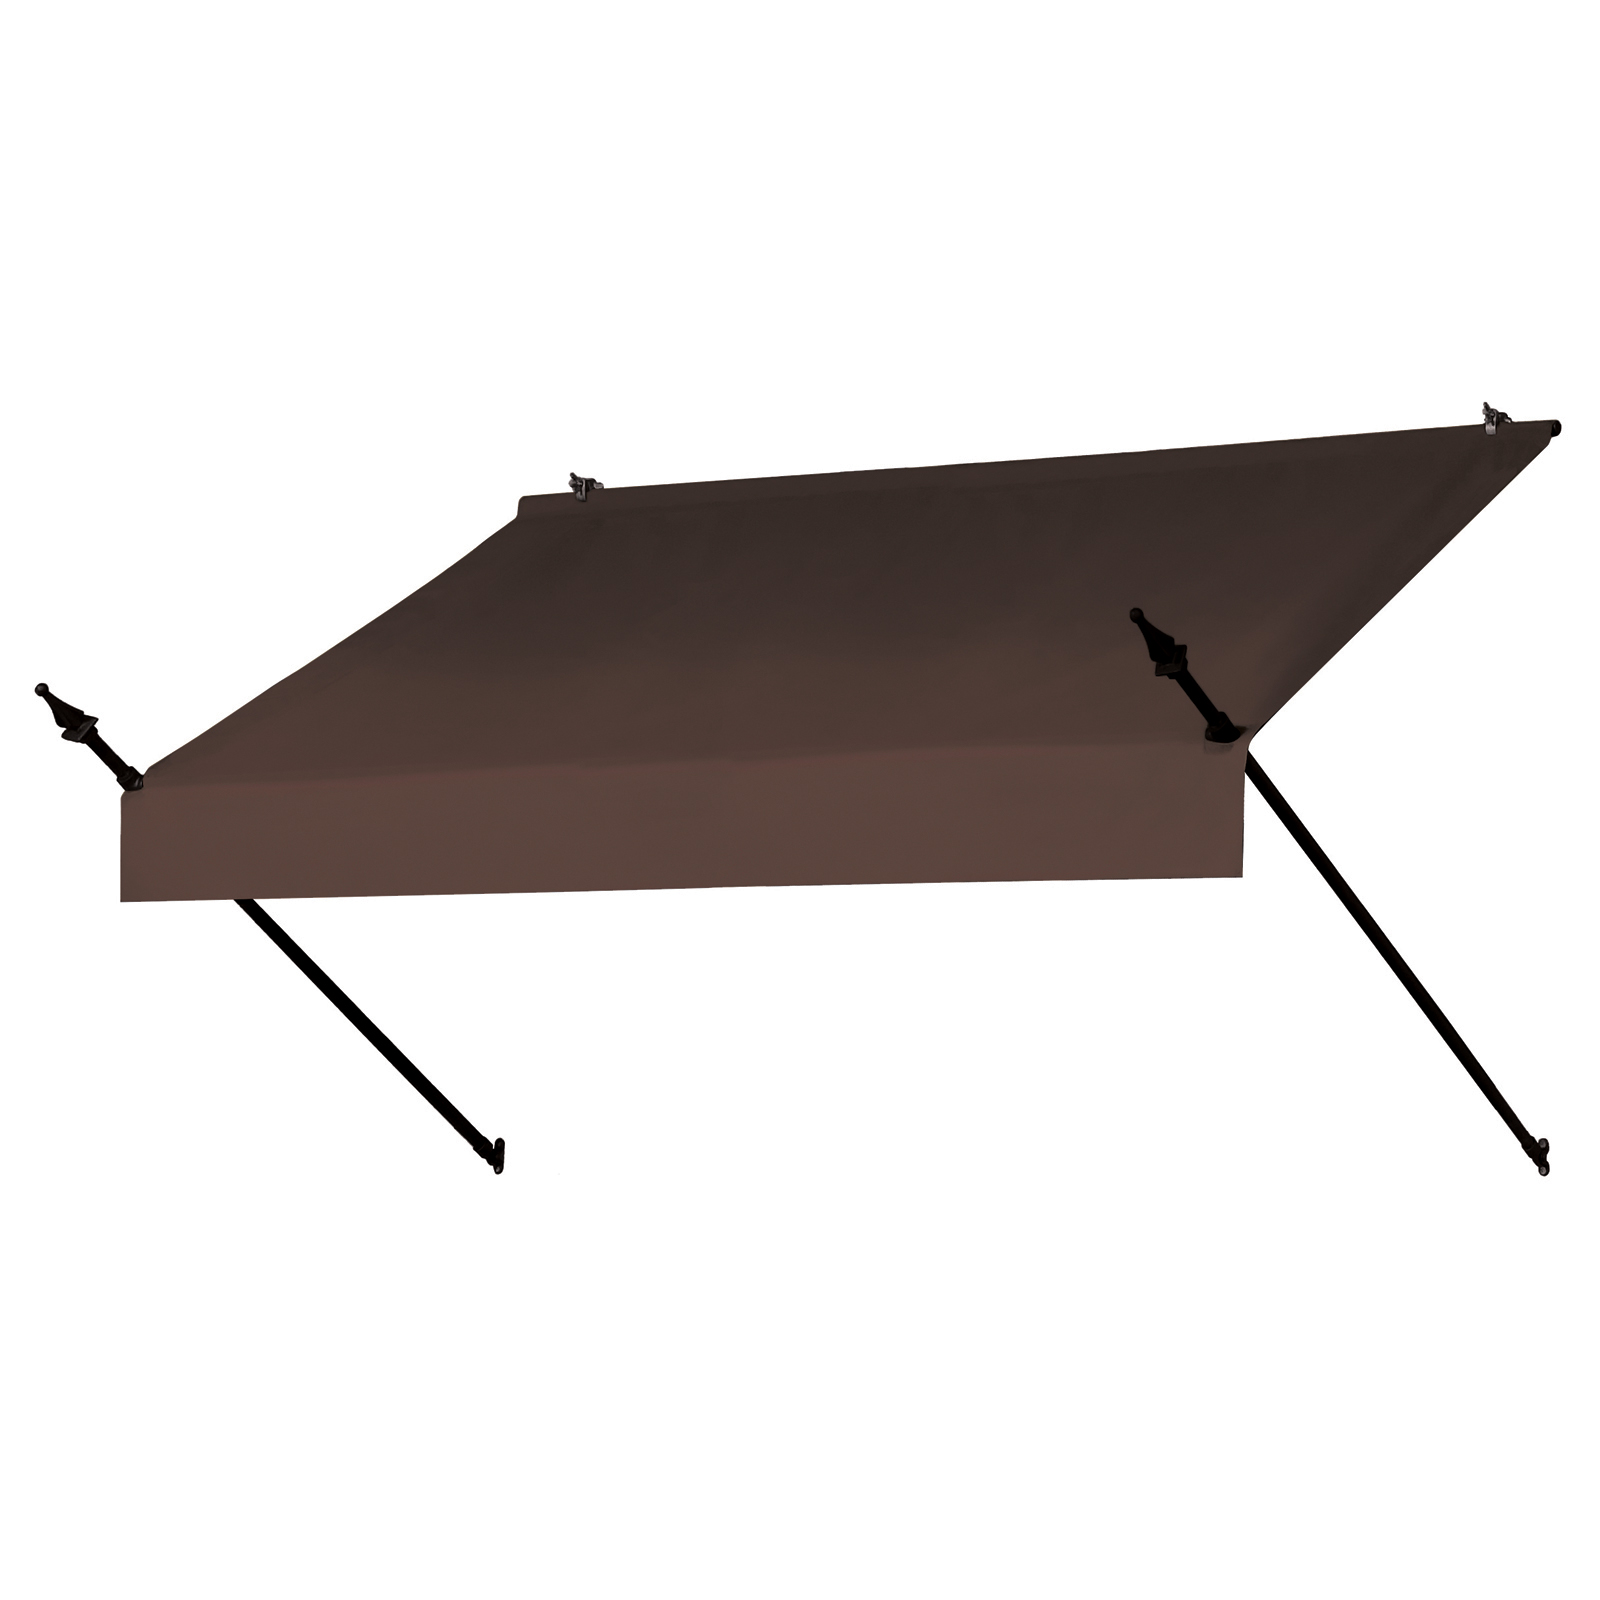 Awnings in a Box&reg; 8' Designer Style Awning in Assorted Colors